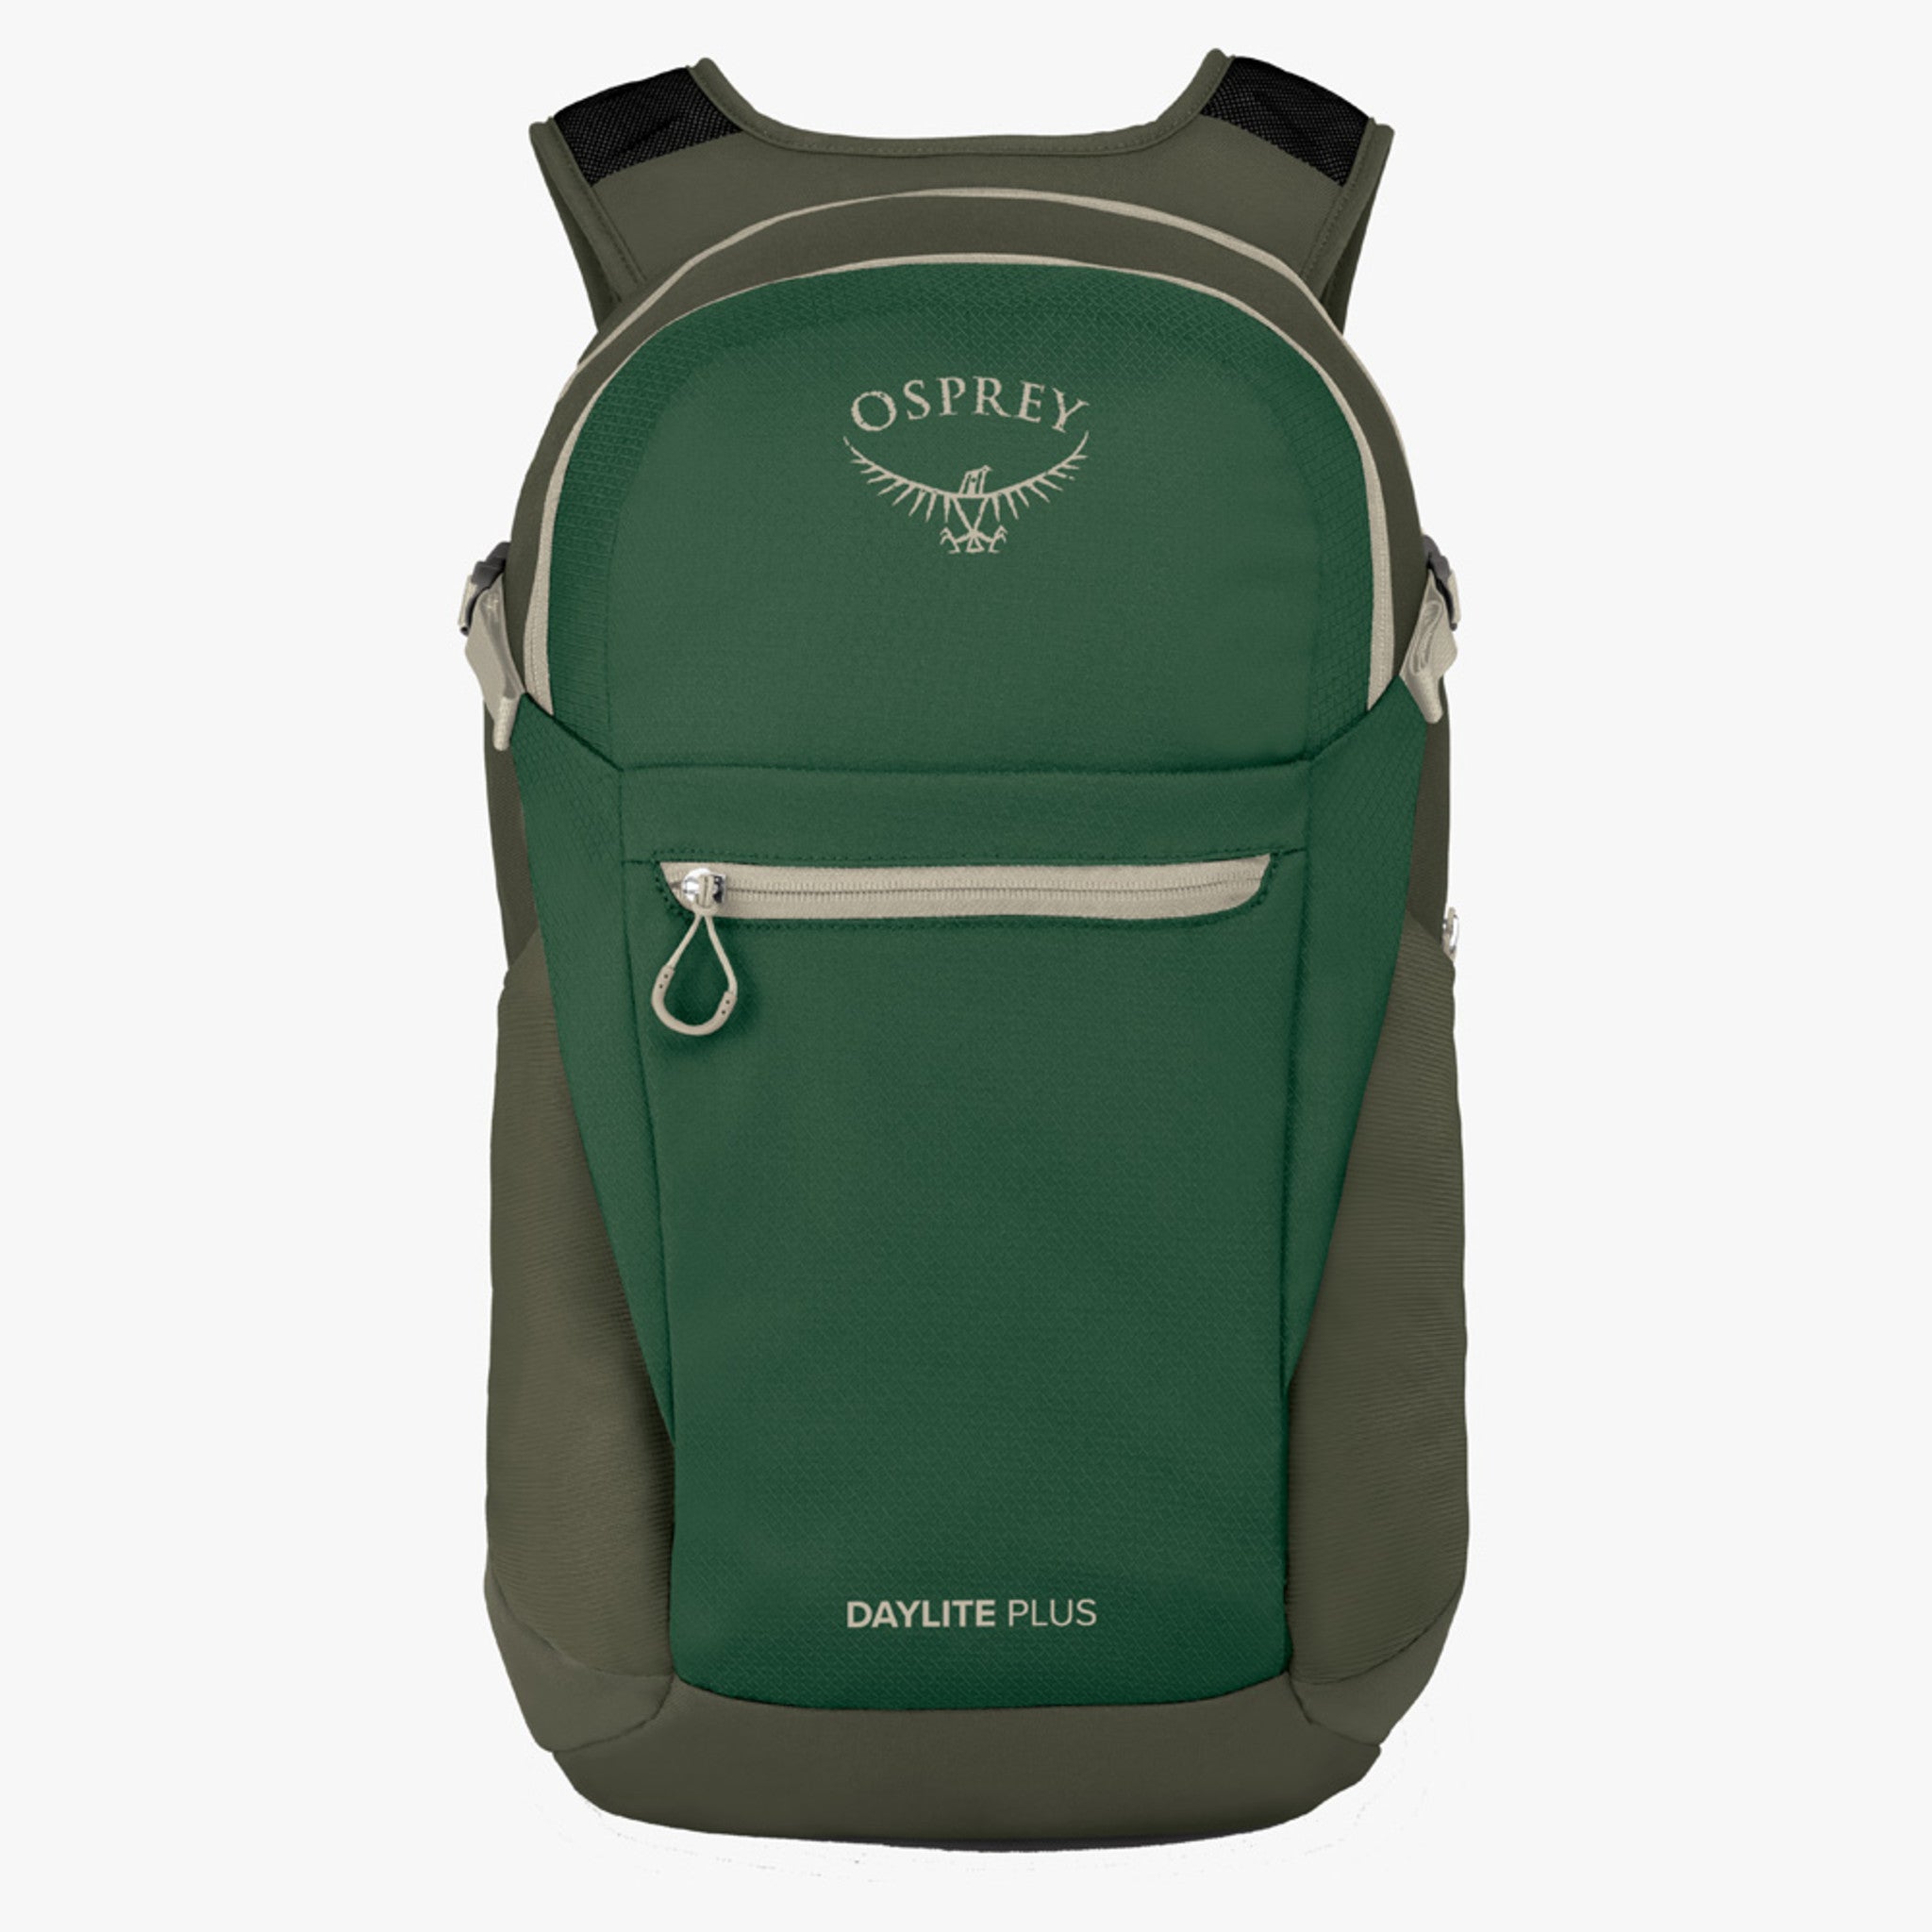 Osprey Daylite Plus Pack, Accessories / Bags